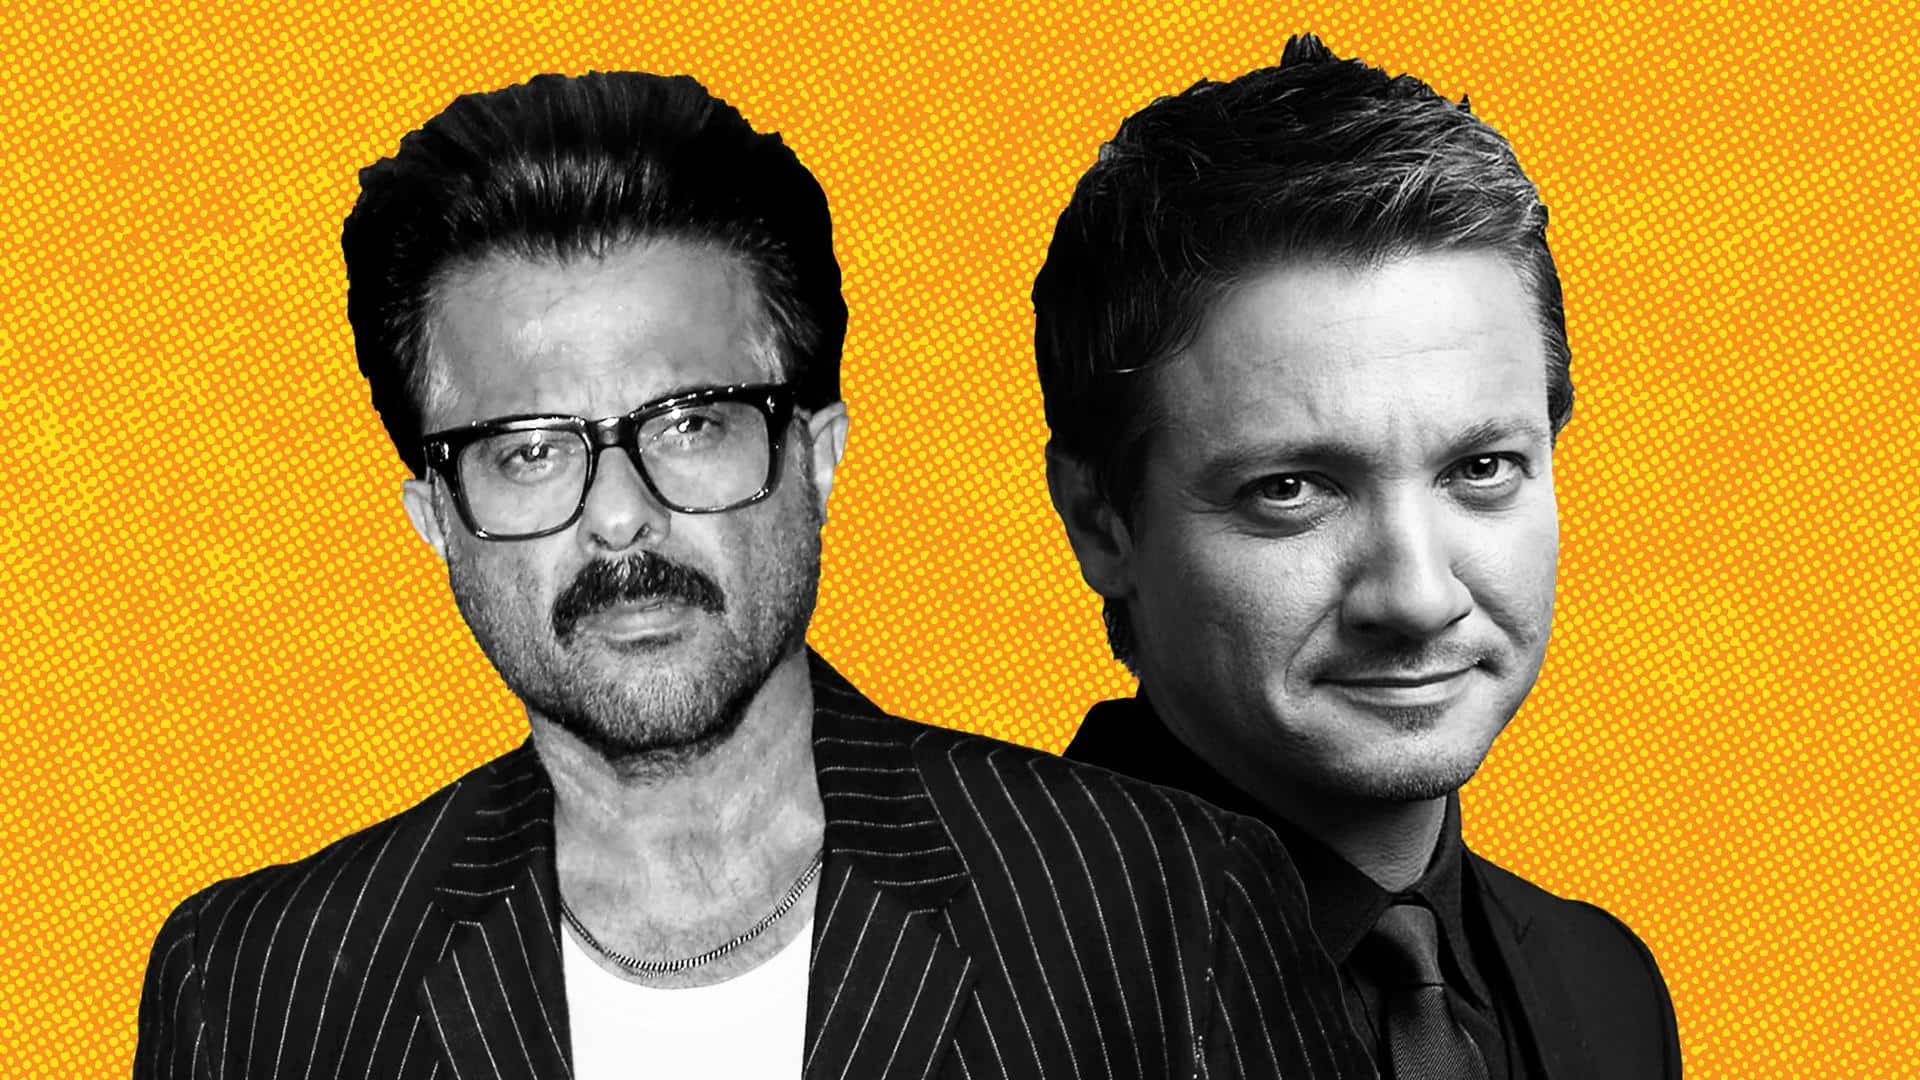 Anil Kapoor to collaborate with Jeremy Renner for Disney's 'Rennervations'